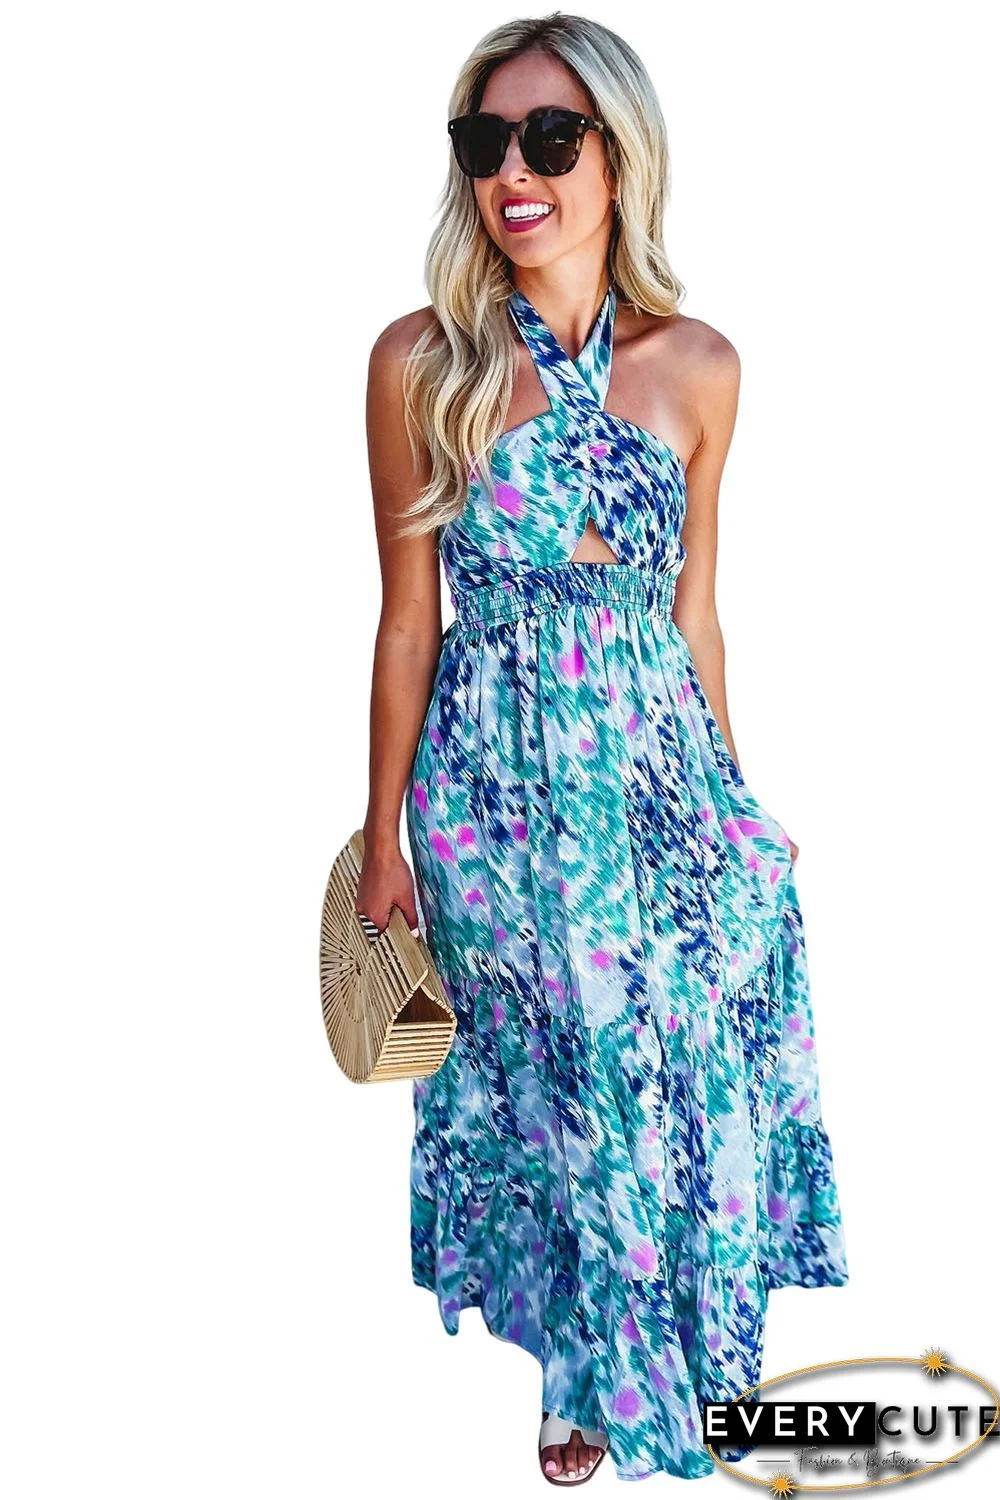 Sky Blue Abstract Print Shirred Lace-up Halter Open Back Maxi Dress